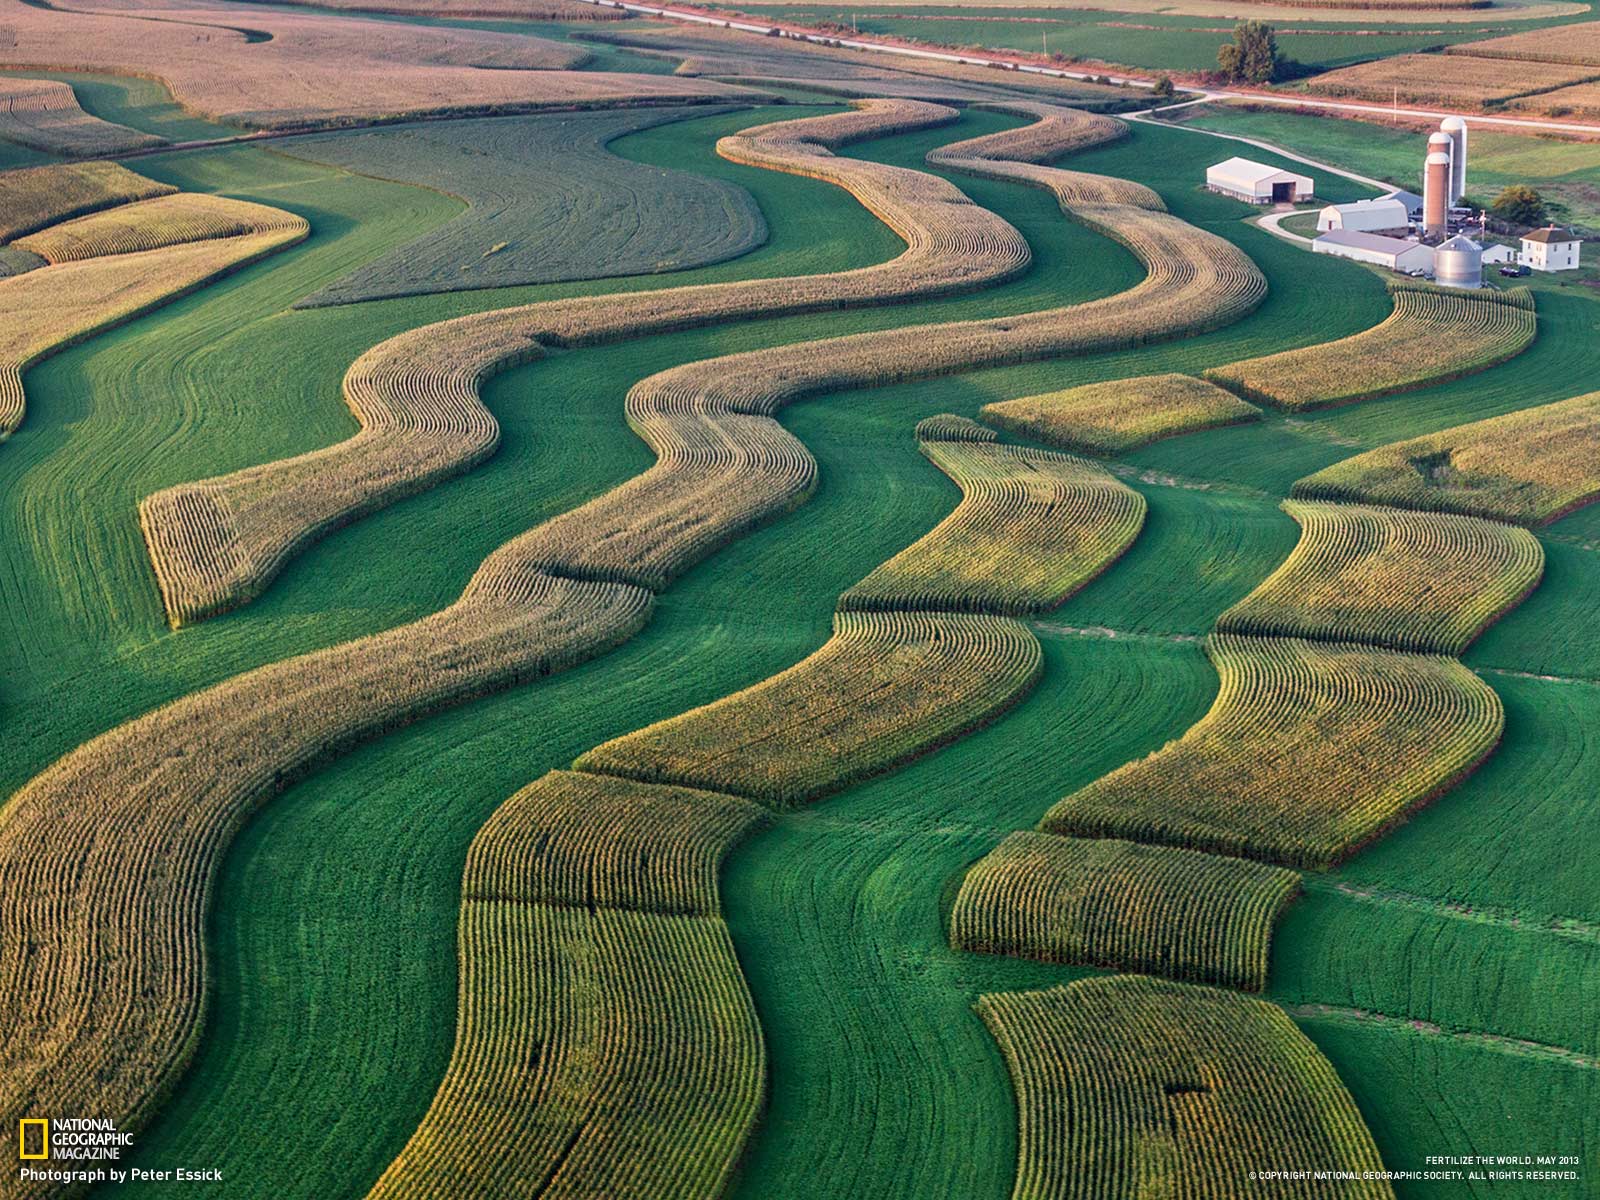 From The Curse of Fertilizer National Geographic May 2013